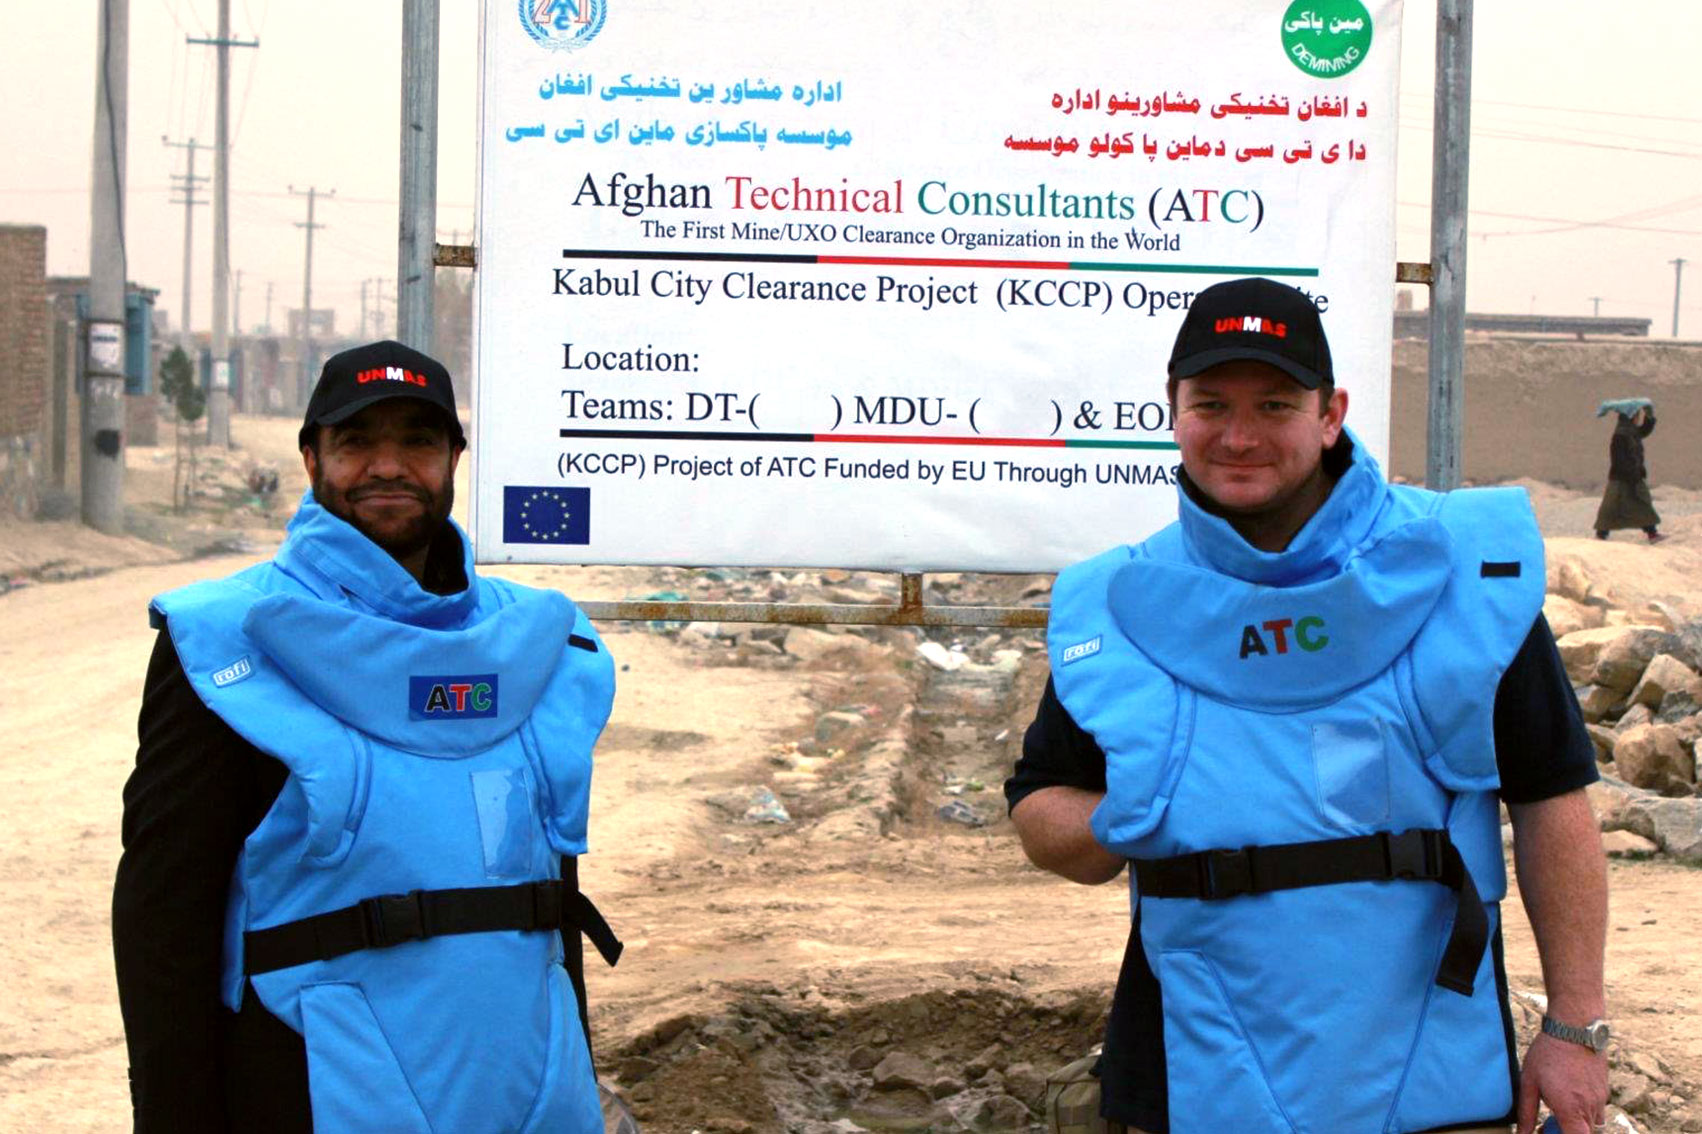 Paul Heslop and Kef Alatulla pose for a photo wearing protective body vests.